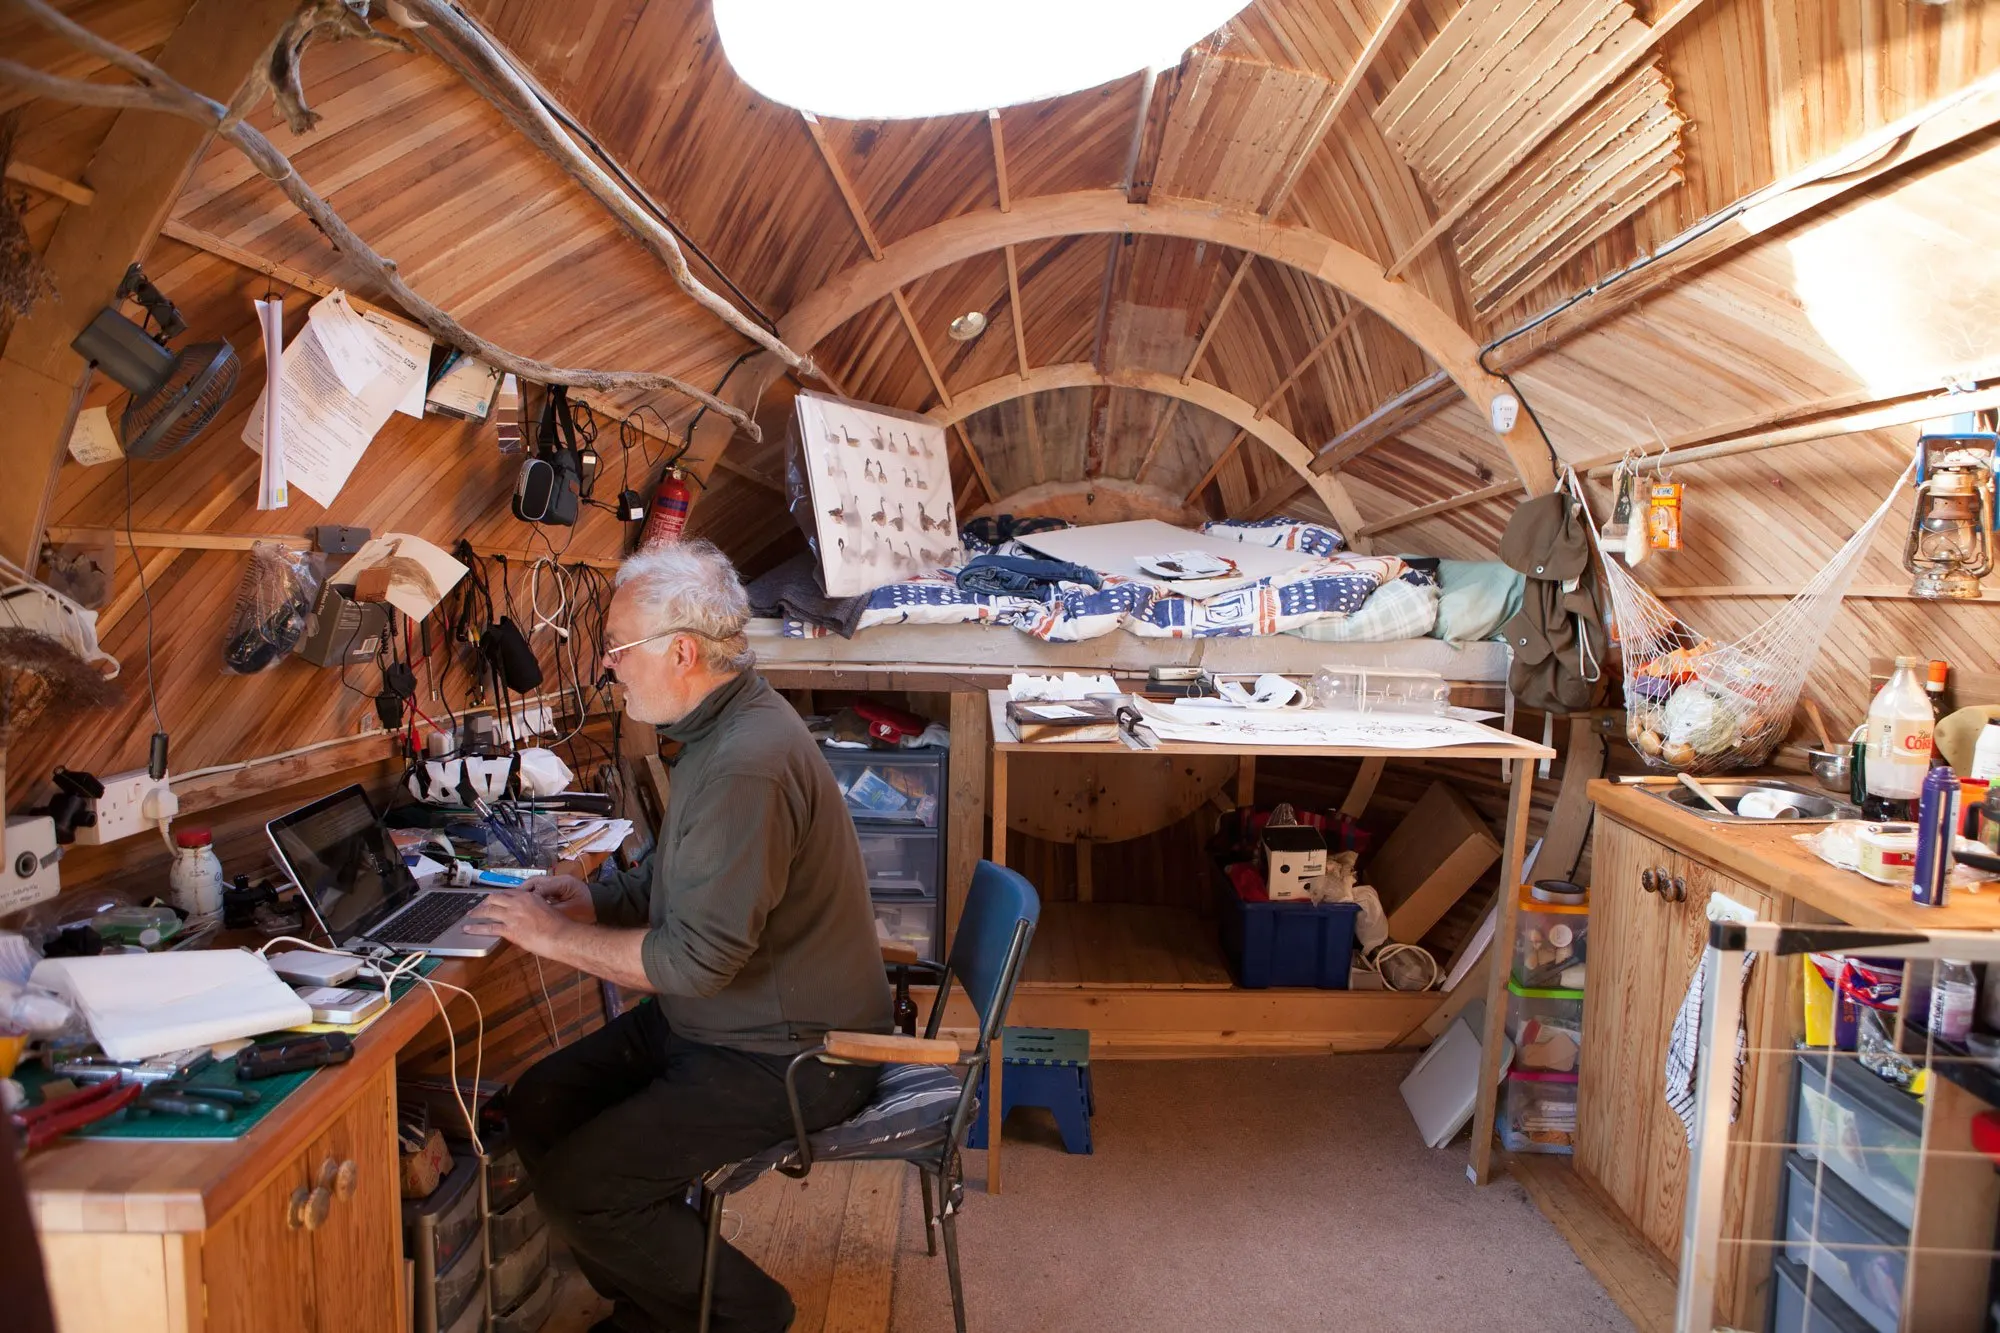 A man sits inside a homey oval wooden structure that almost looks like the hull of a ship. He works from a laptop on a desk strewn with stuff. Behind him is a kitchenette and beyond him looks like a living area